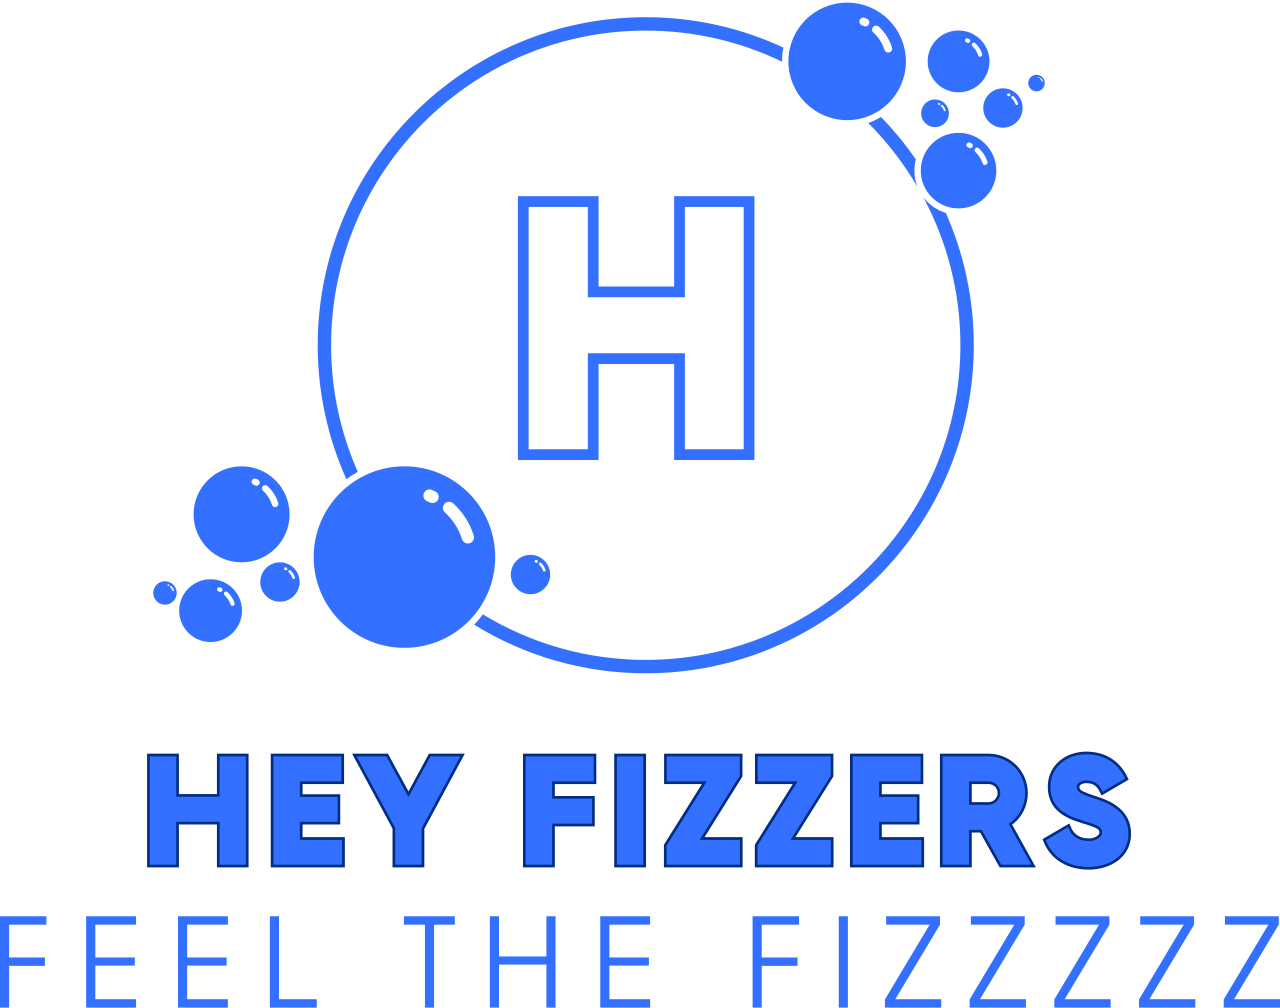 Hey Fizzers's web page